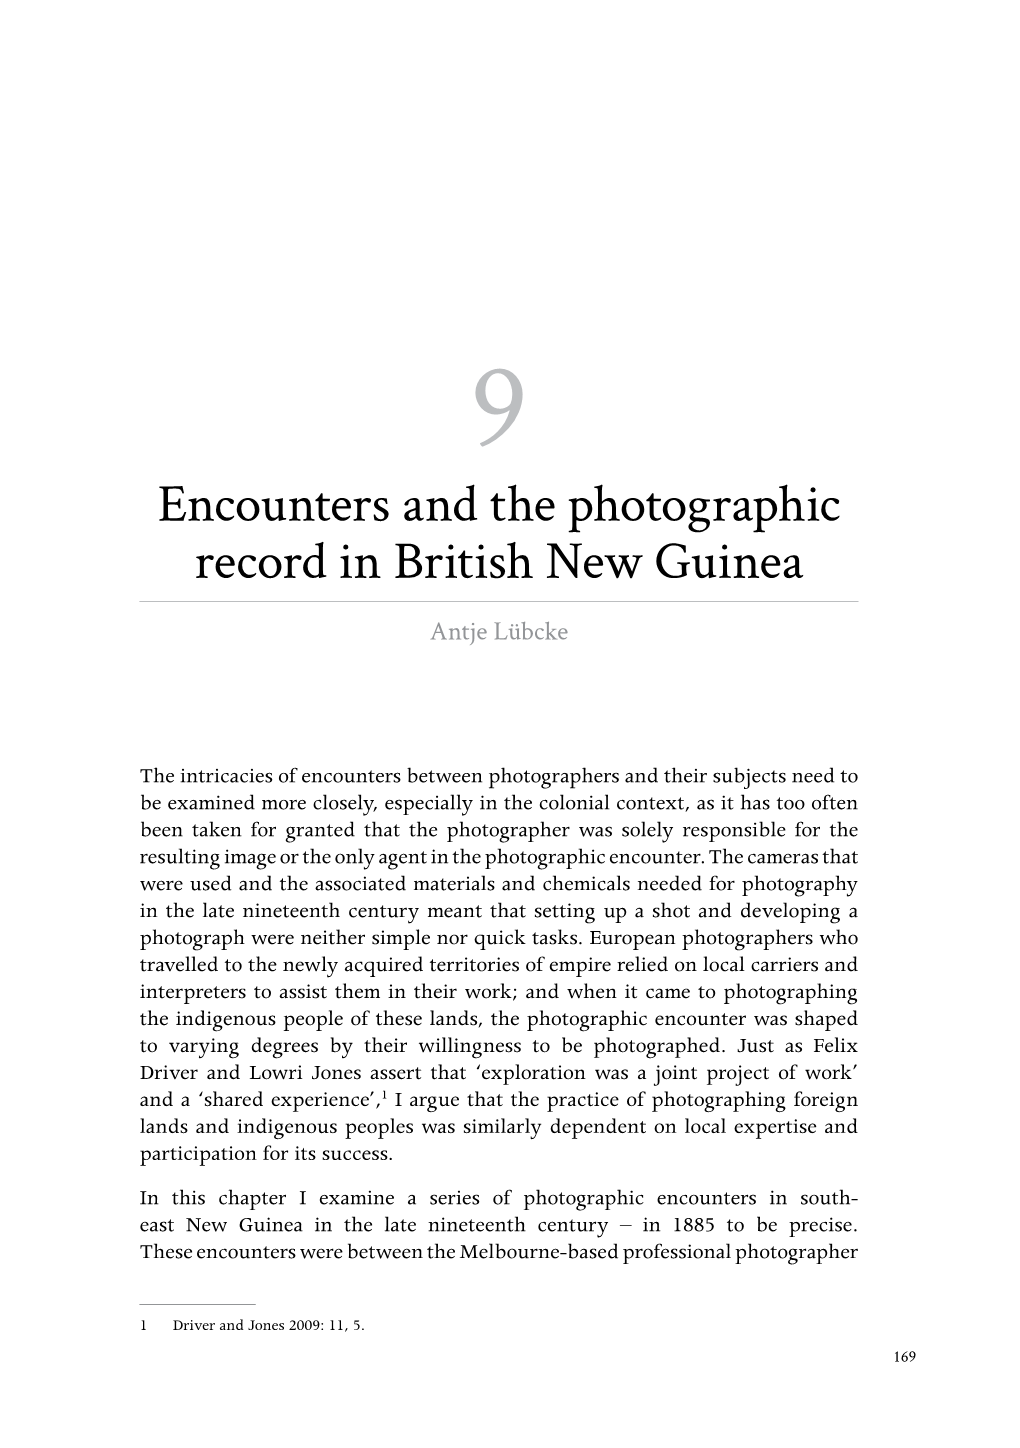 Encounters and the Photographic Record in British New Guinea